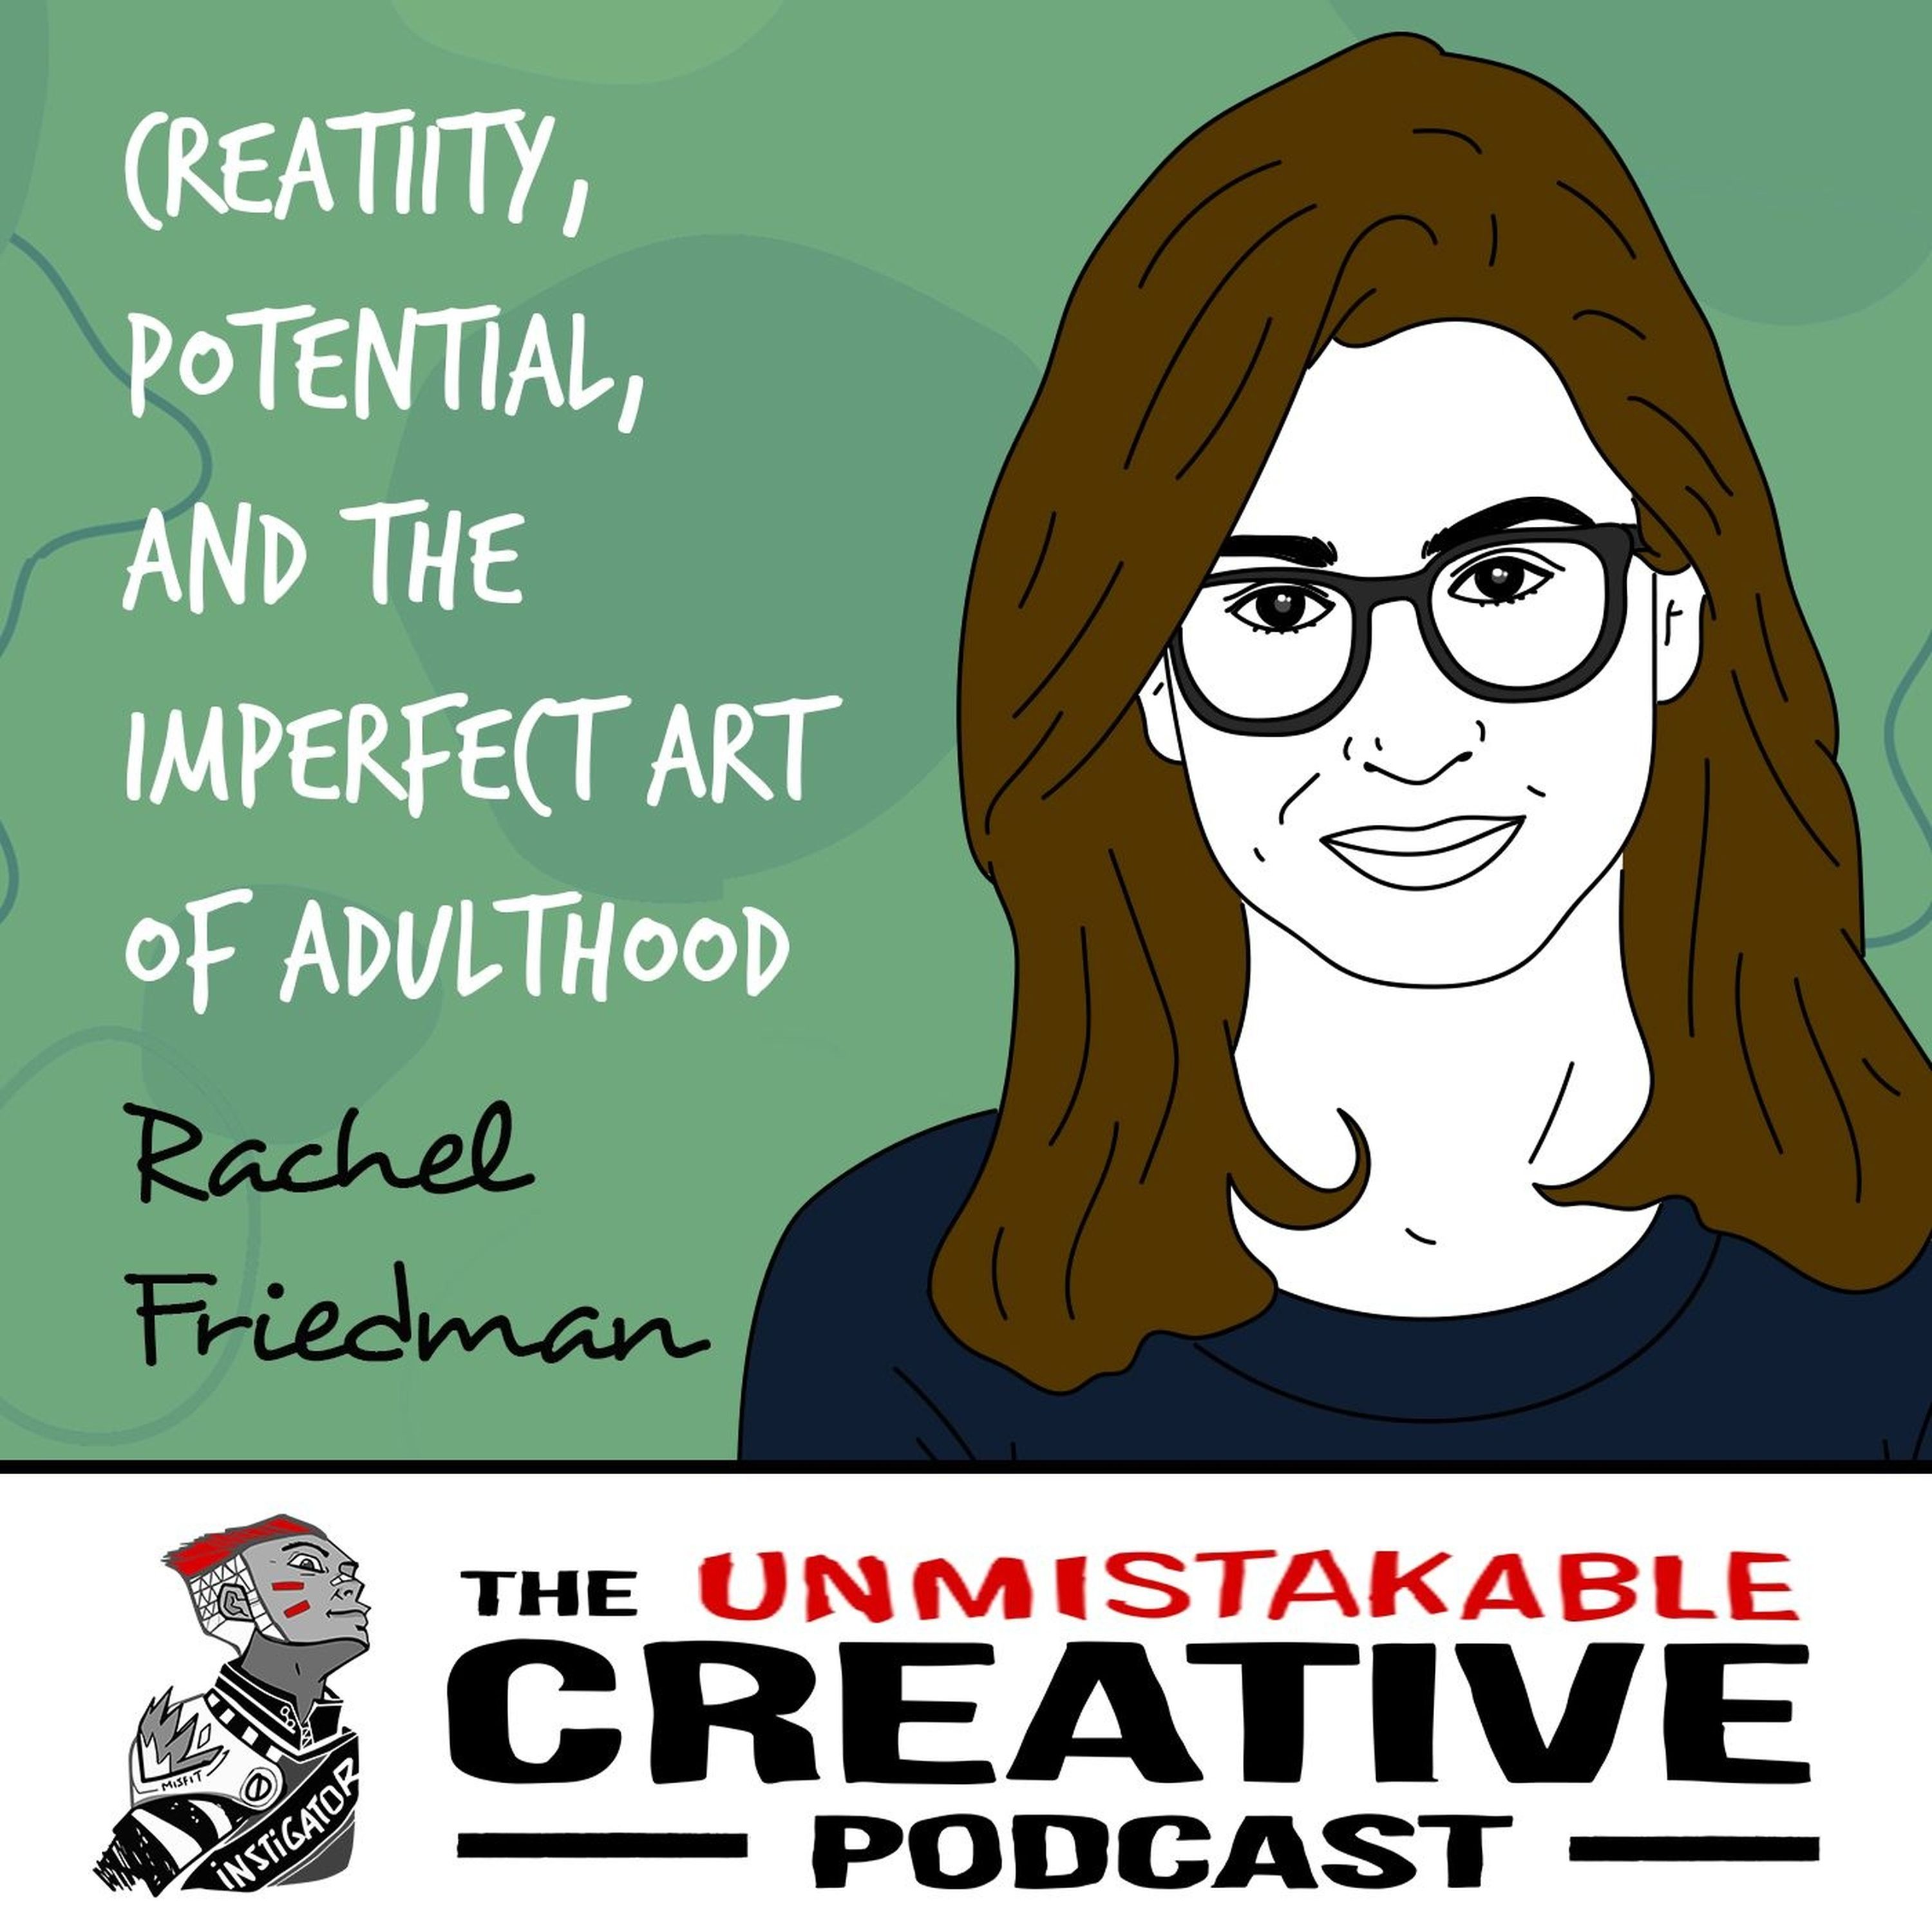 Rachel Friedman | Creativity, Potential, and The Imperfect Art of Adulthood